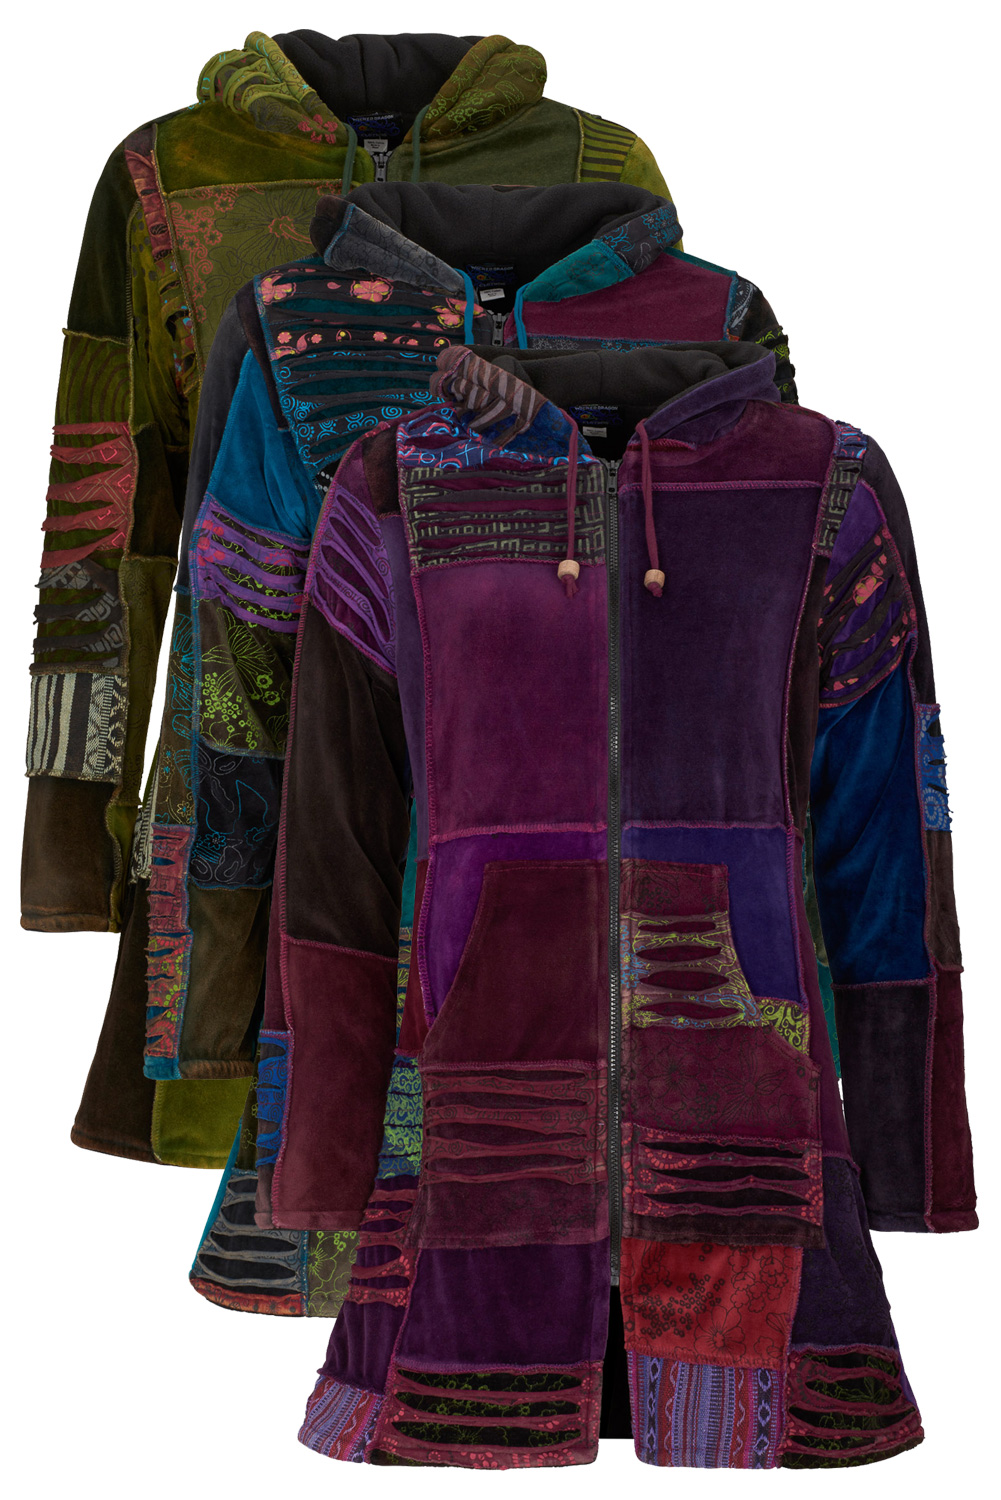 Wicked Dragon Clothing - Long fleece lined velvet patchwork jacket